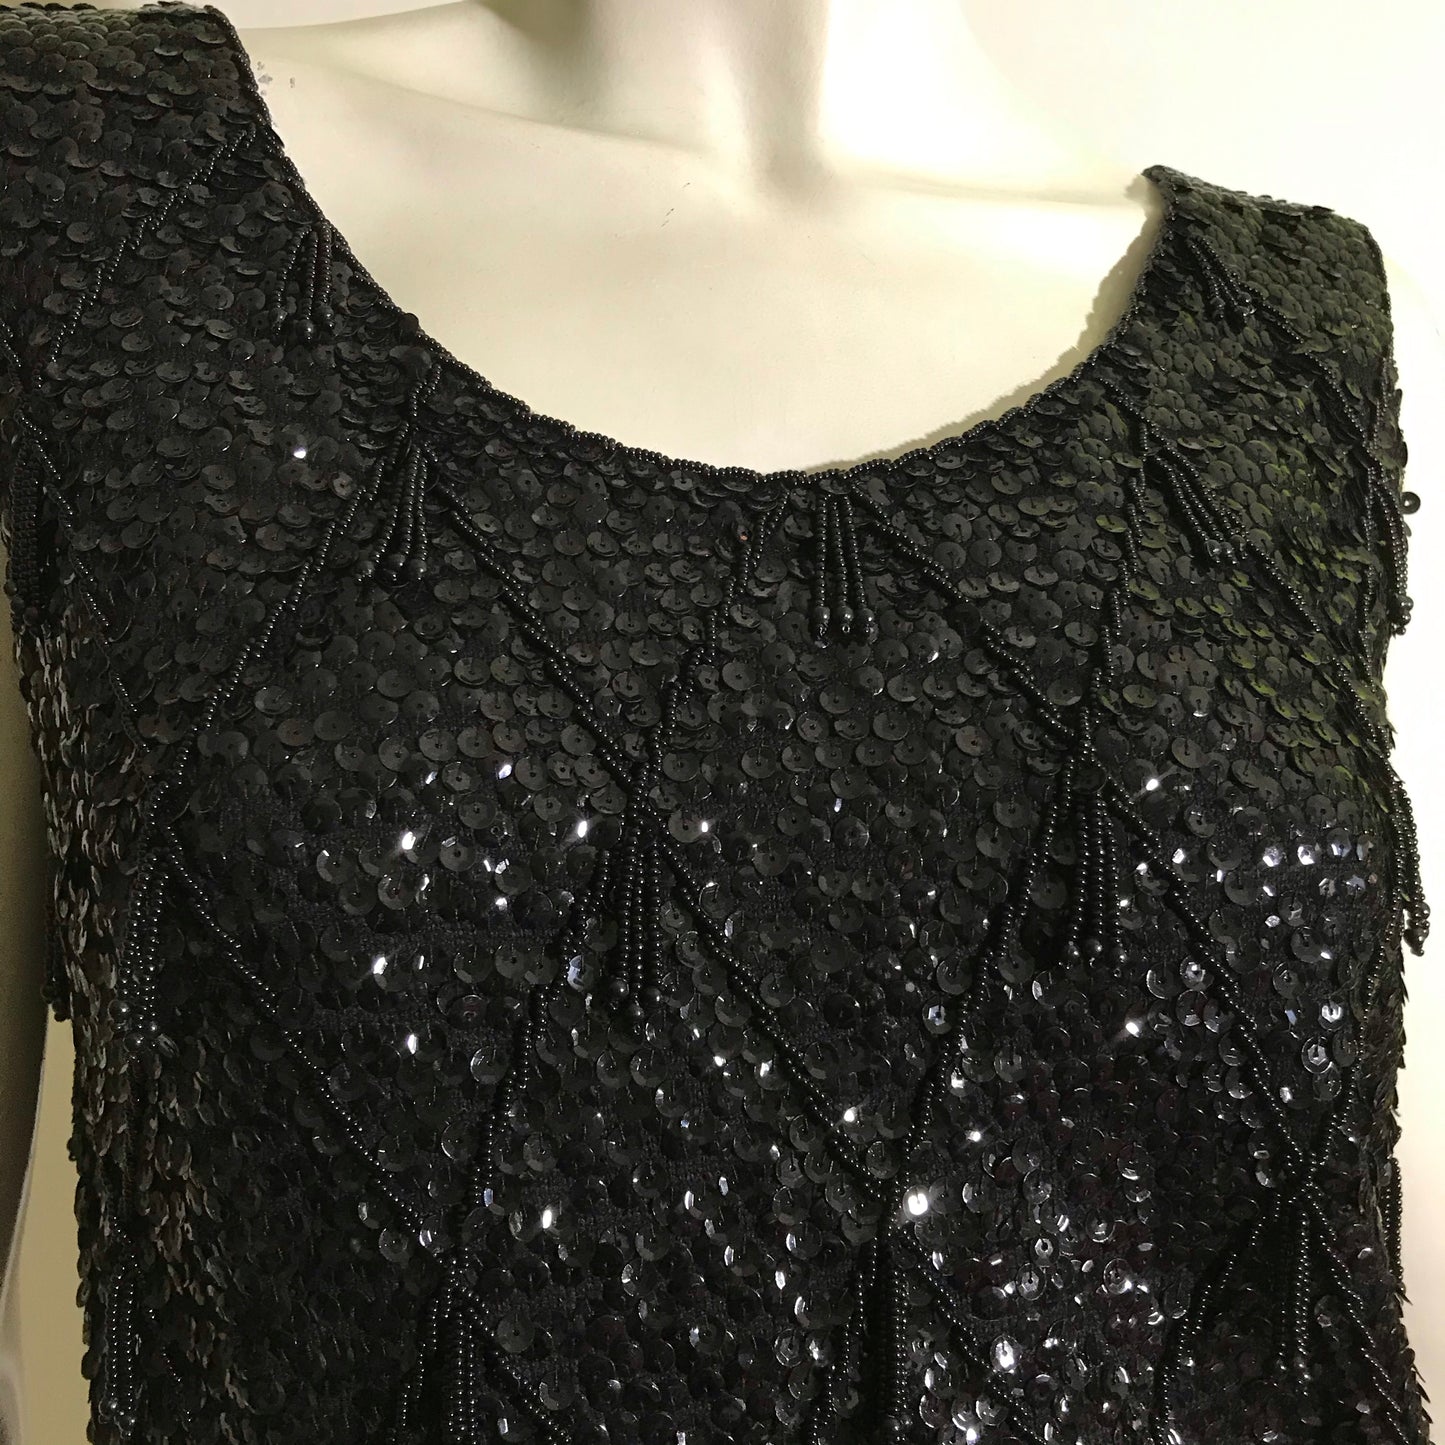 Shimmering Black Sequined and Beaded Wool Knit Camisole Top circa 1960s